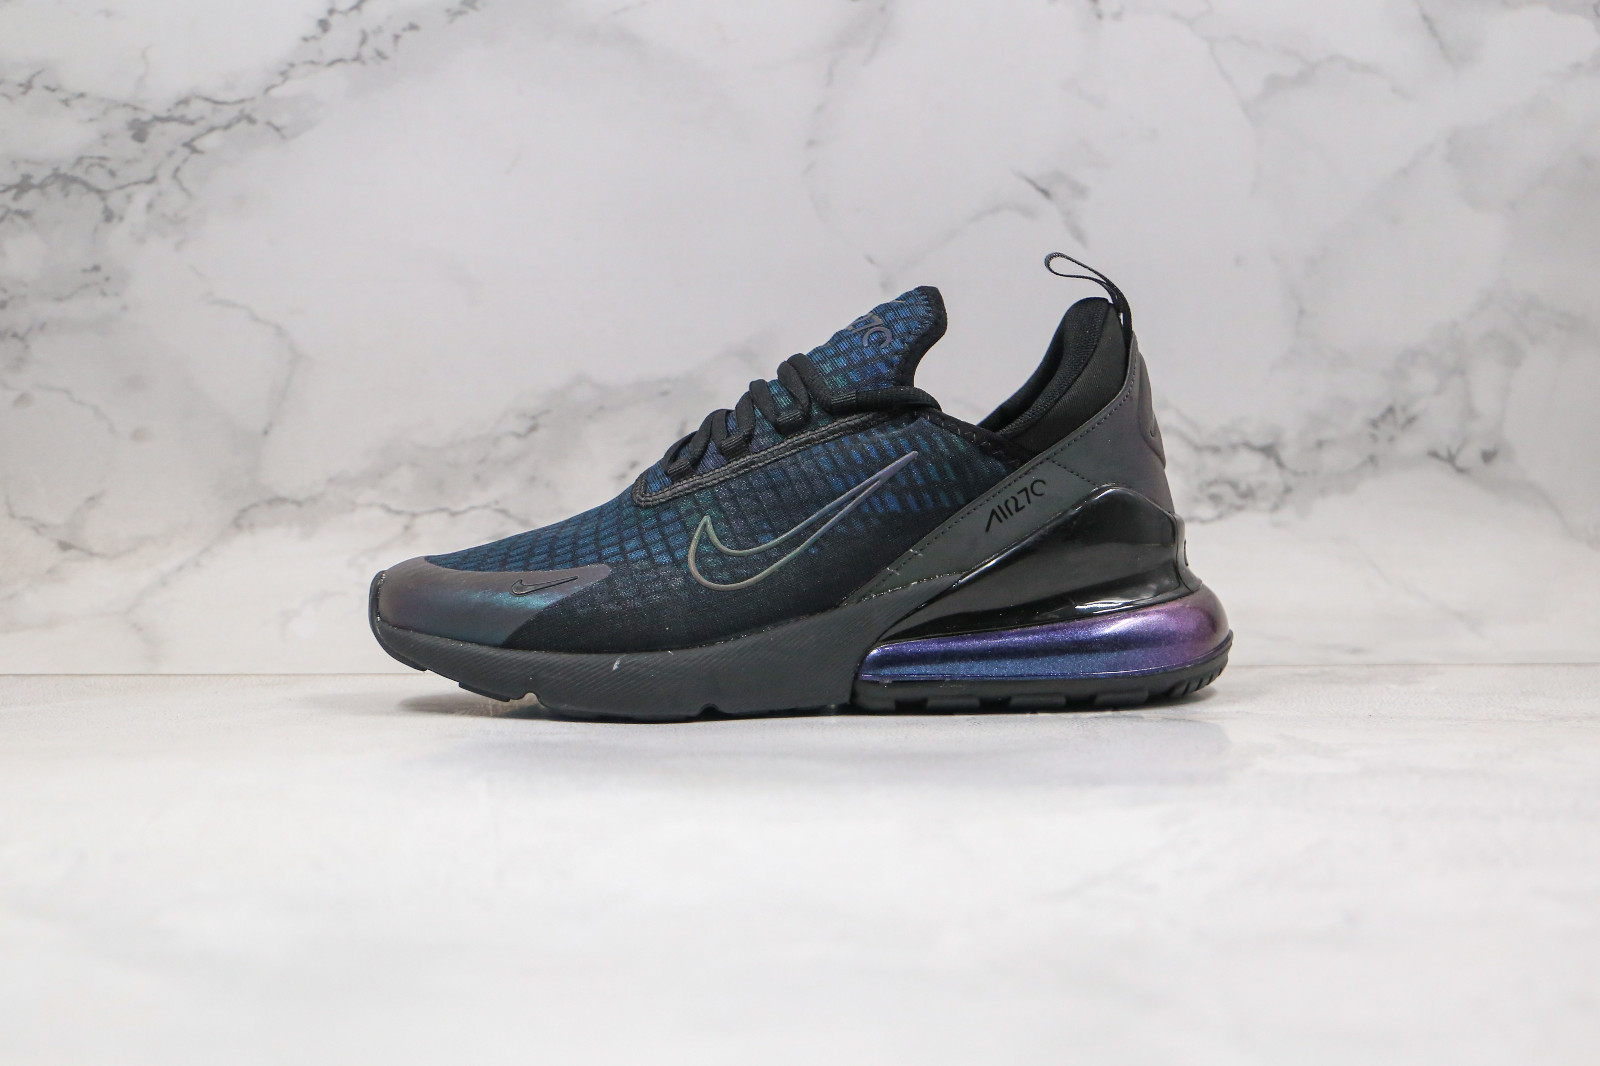 nike janoski low cheap today - 120 - MultiscaleconsultingShops - Nike Air Max 270 Black Gradient Blue Purple Running Shoes AH8050